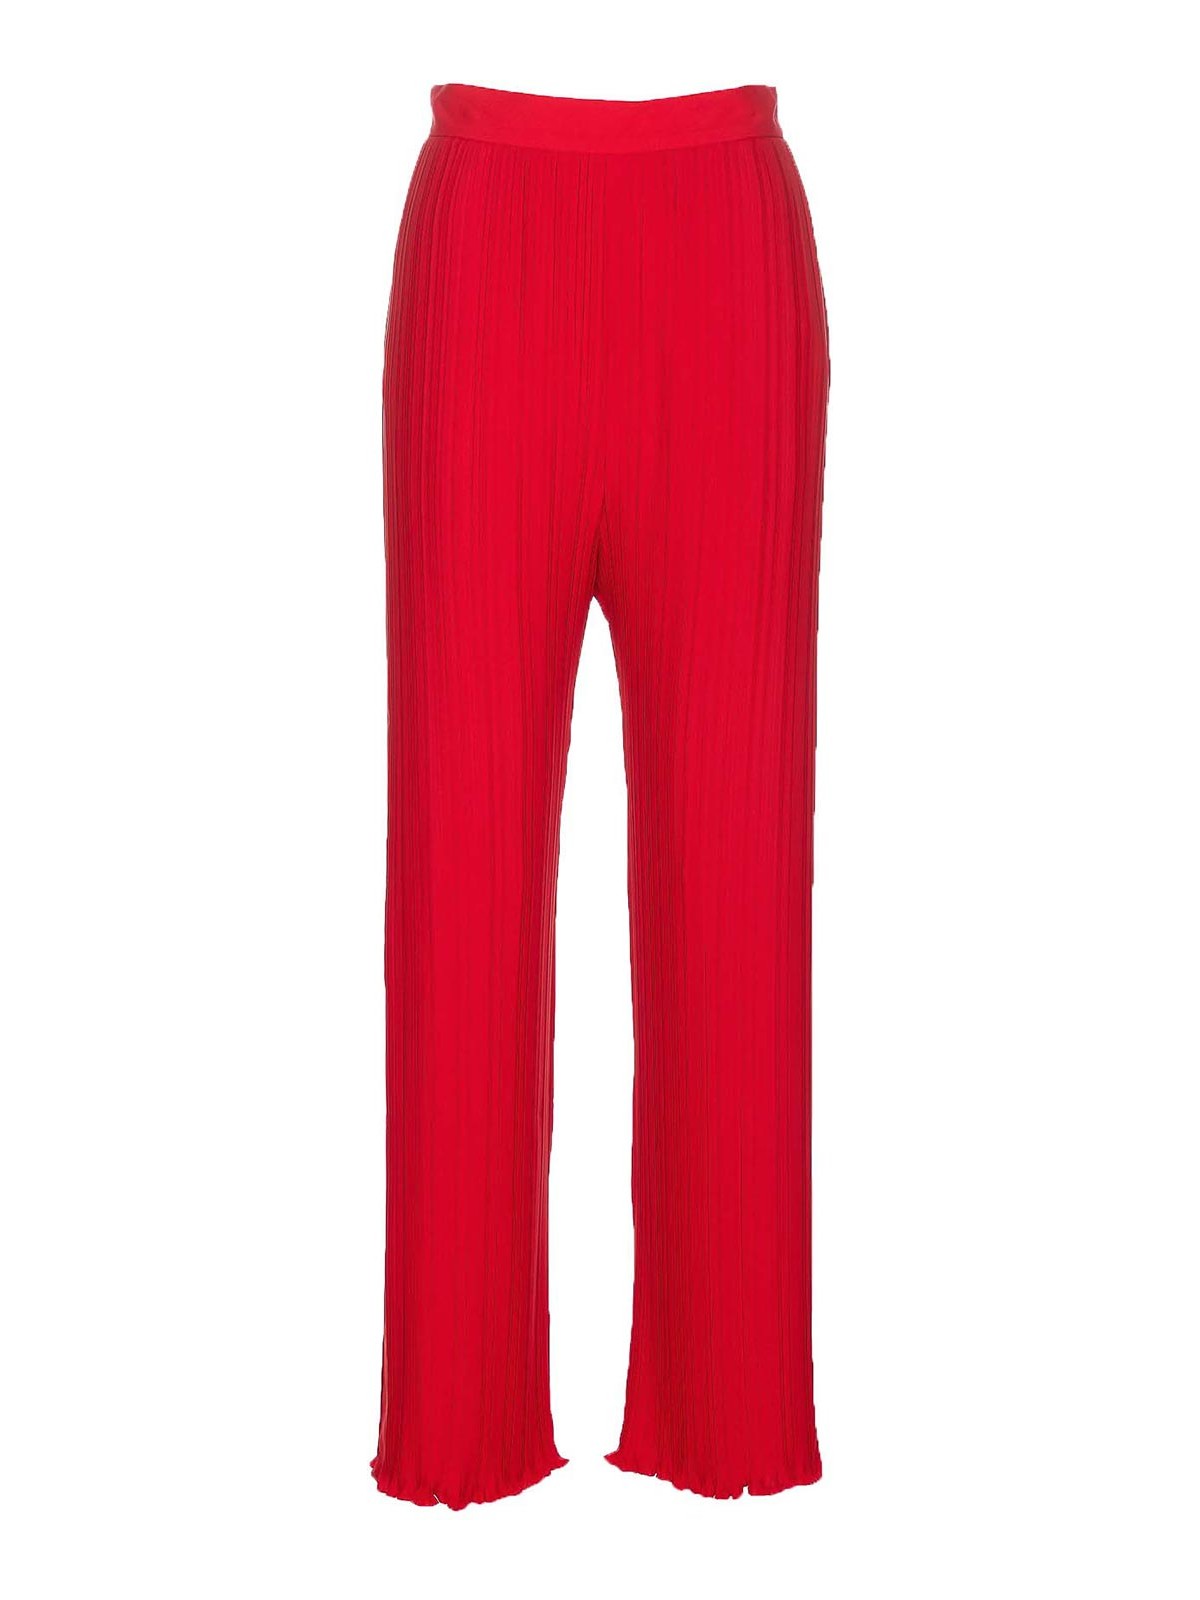 Lanvin Red Pleated Trousers Lateral Zip